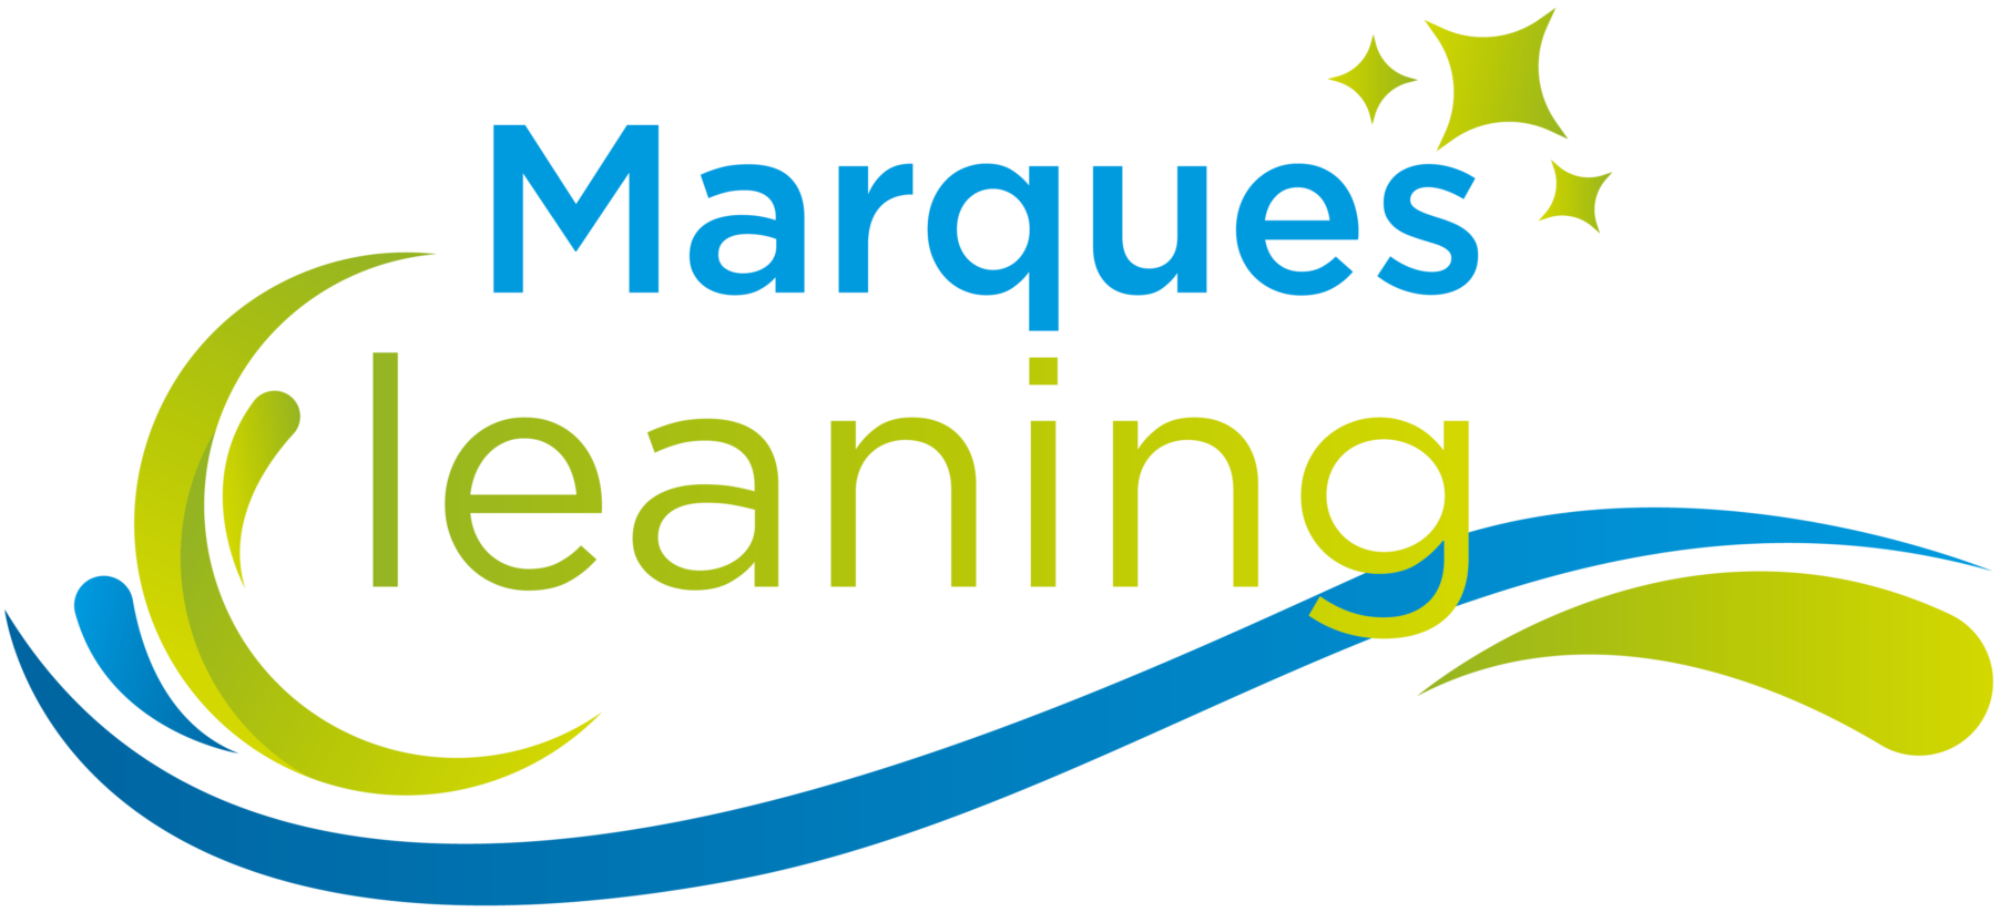 Marques Cleaning